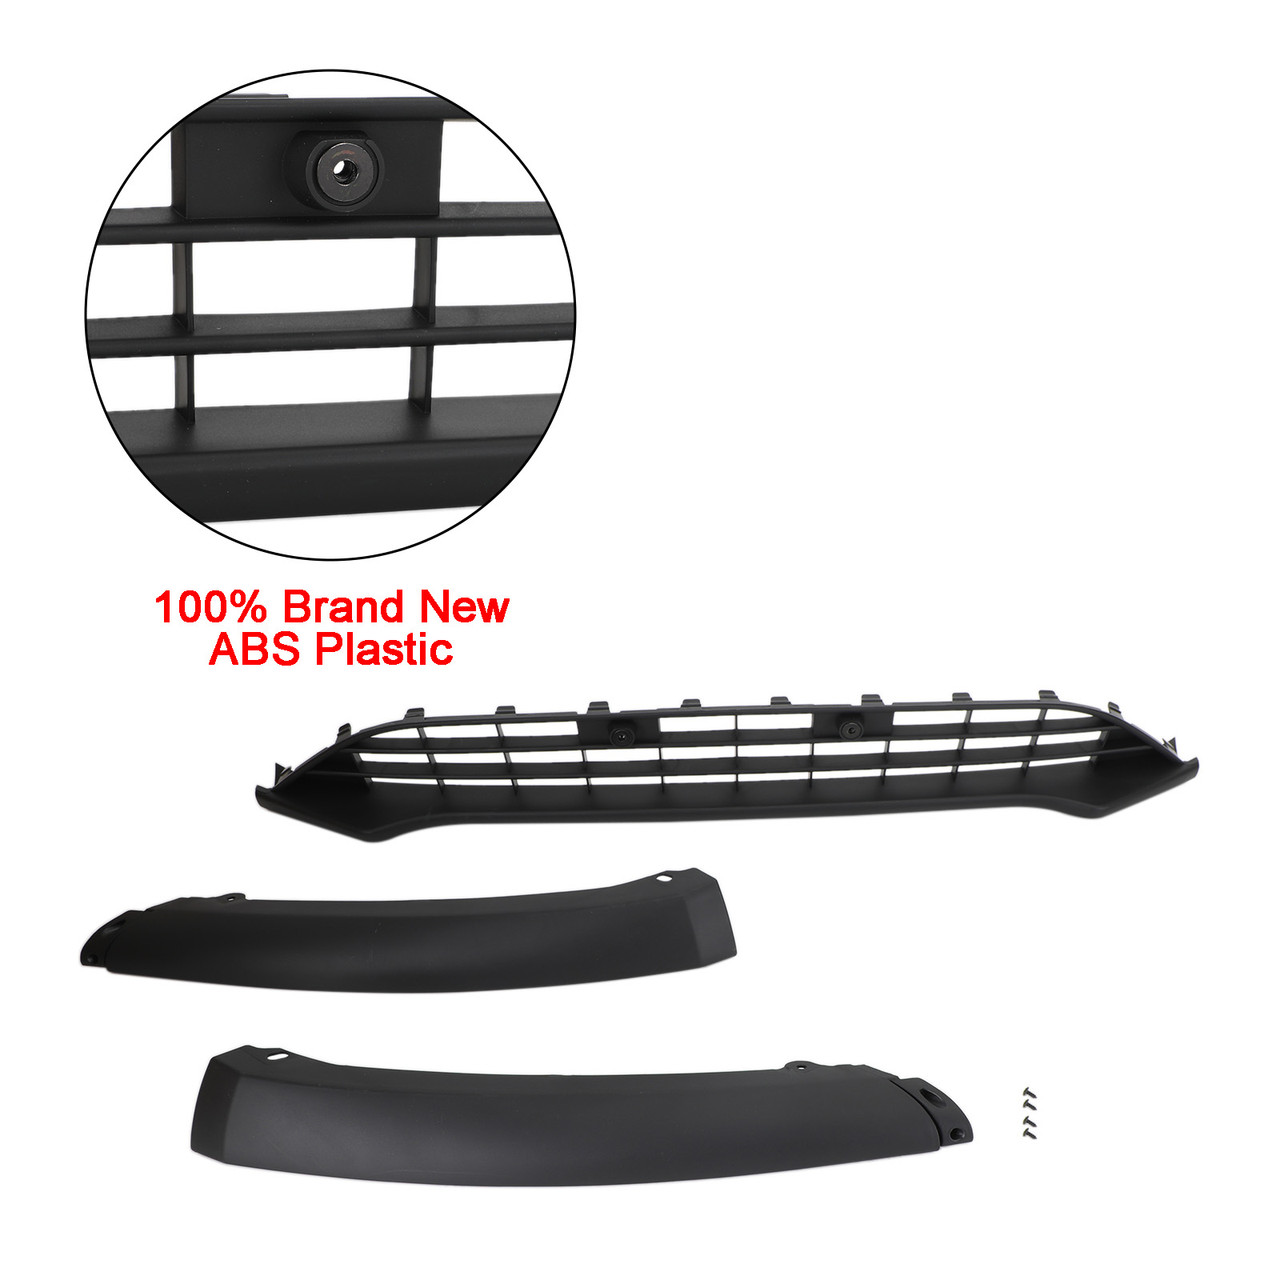 15-18 Ford Focus Valance Panel Front Bumper Lower Grille